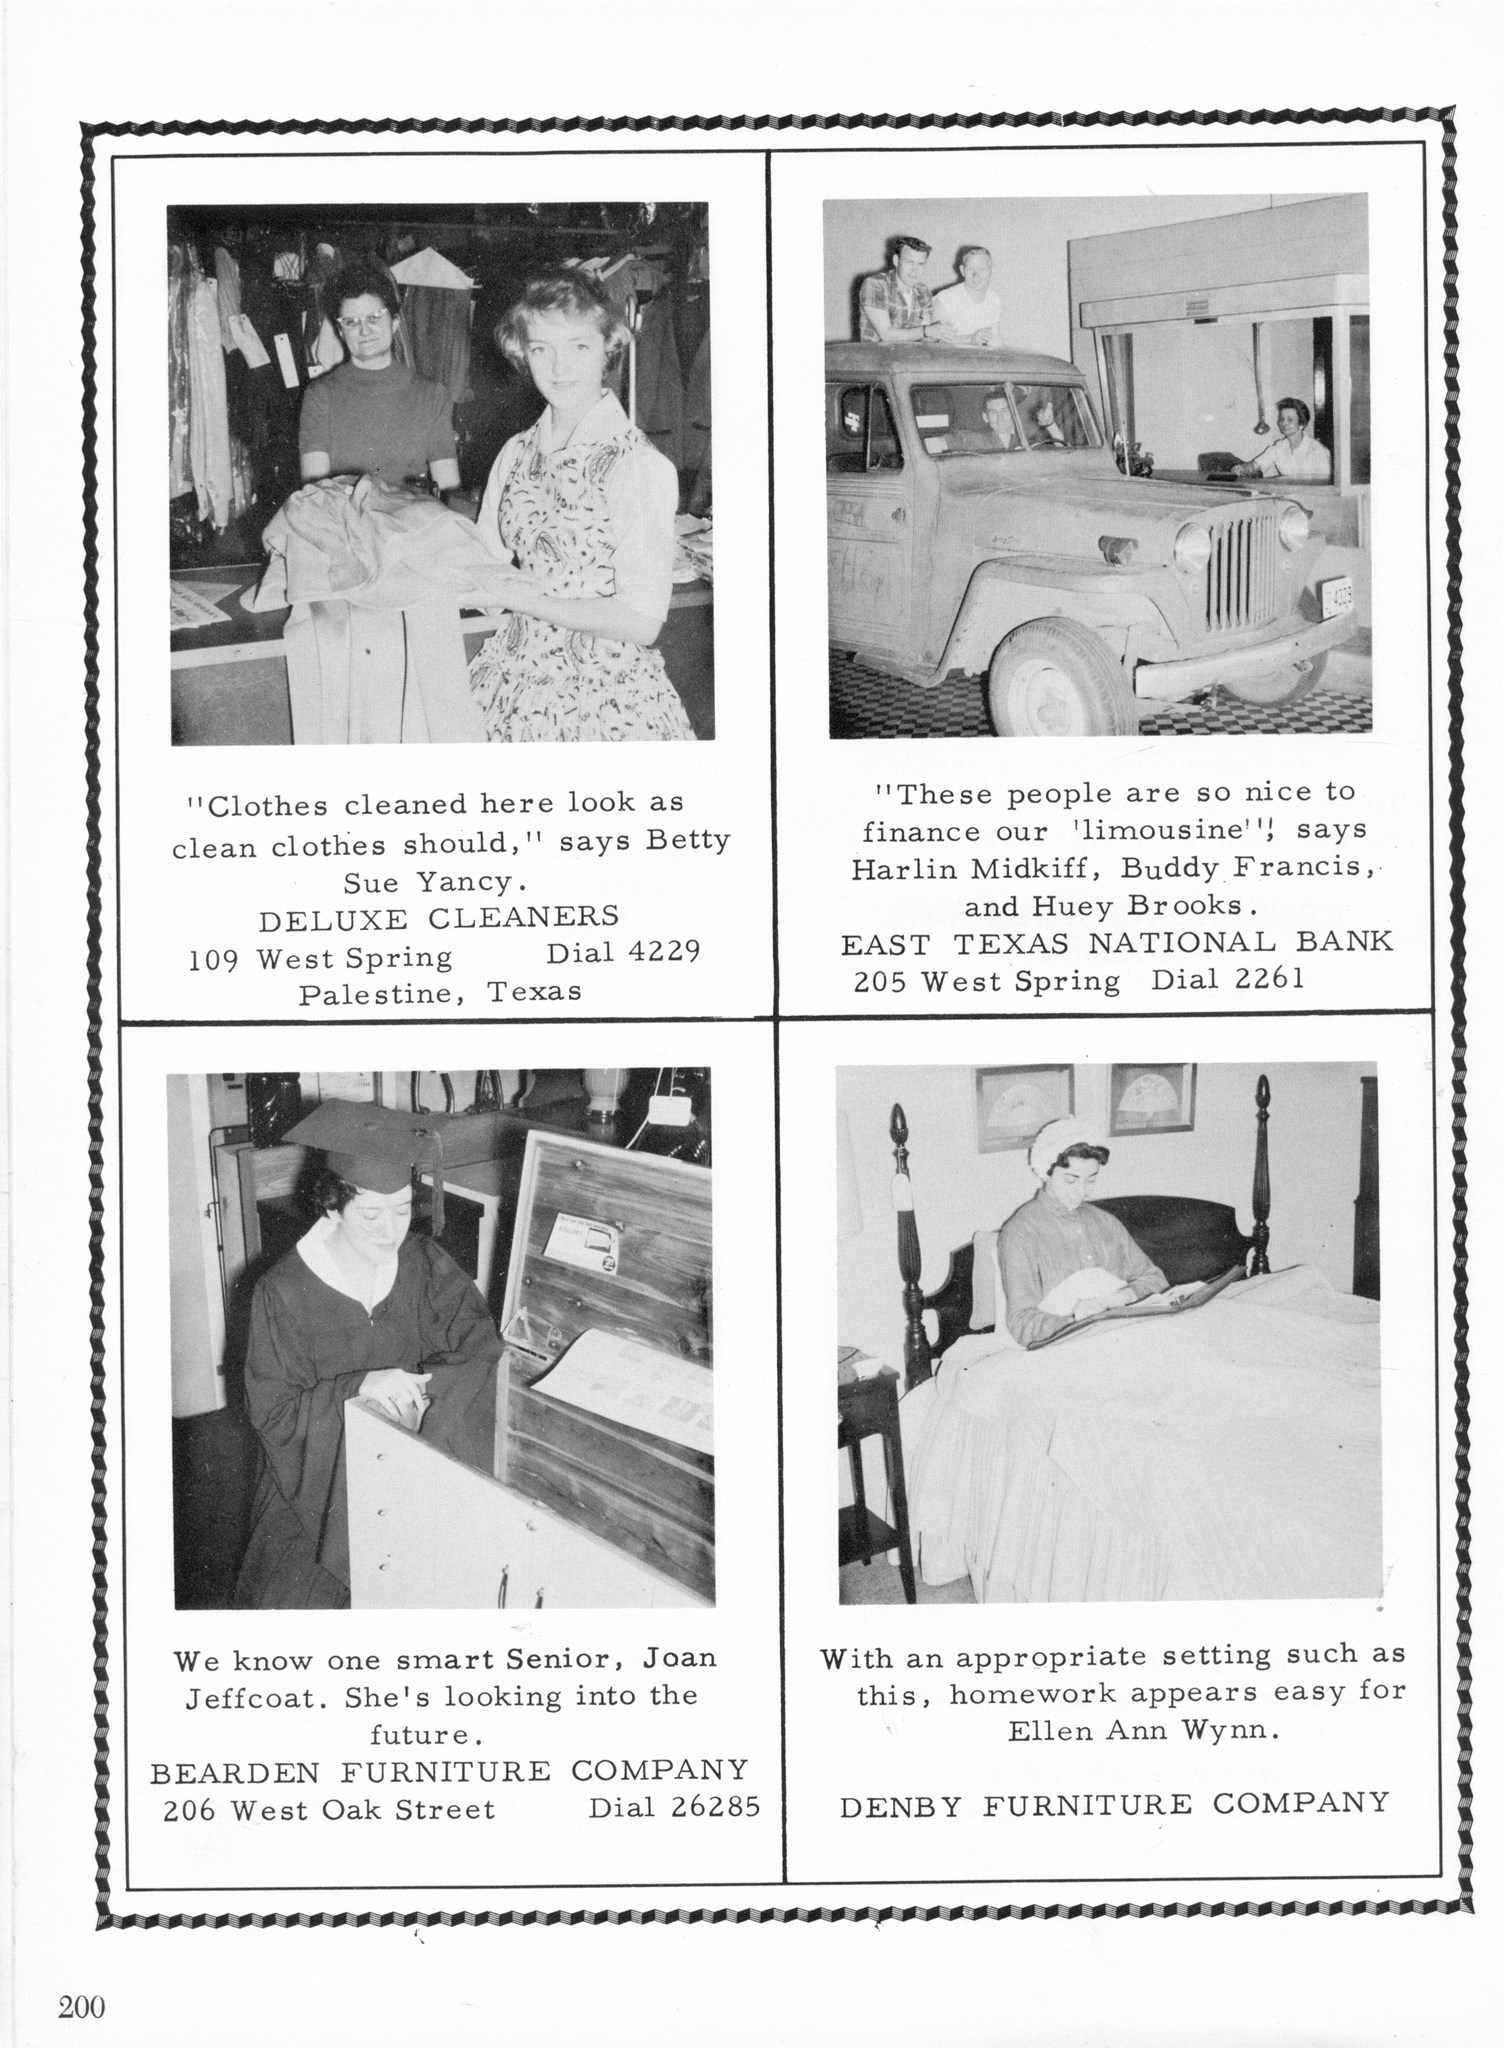 ../../../Images/Large/1959/Arclight-1959-pg0200.jpg